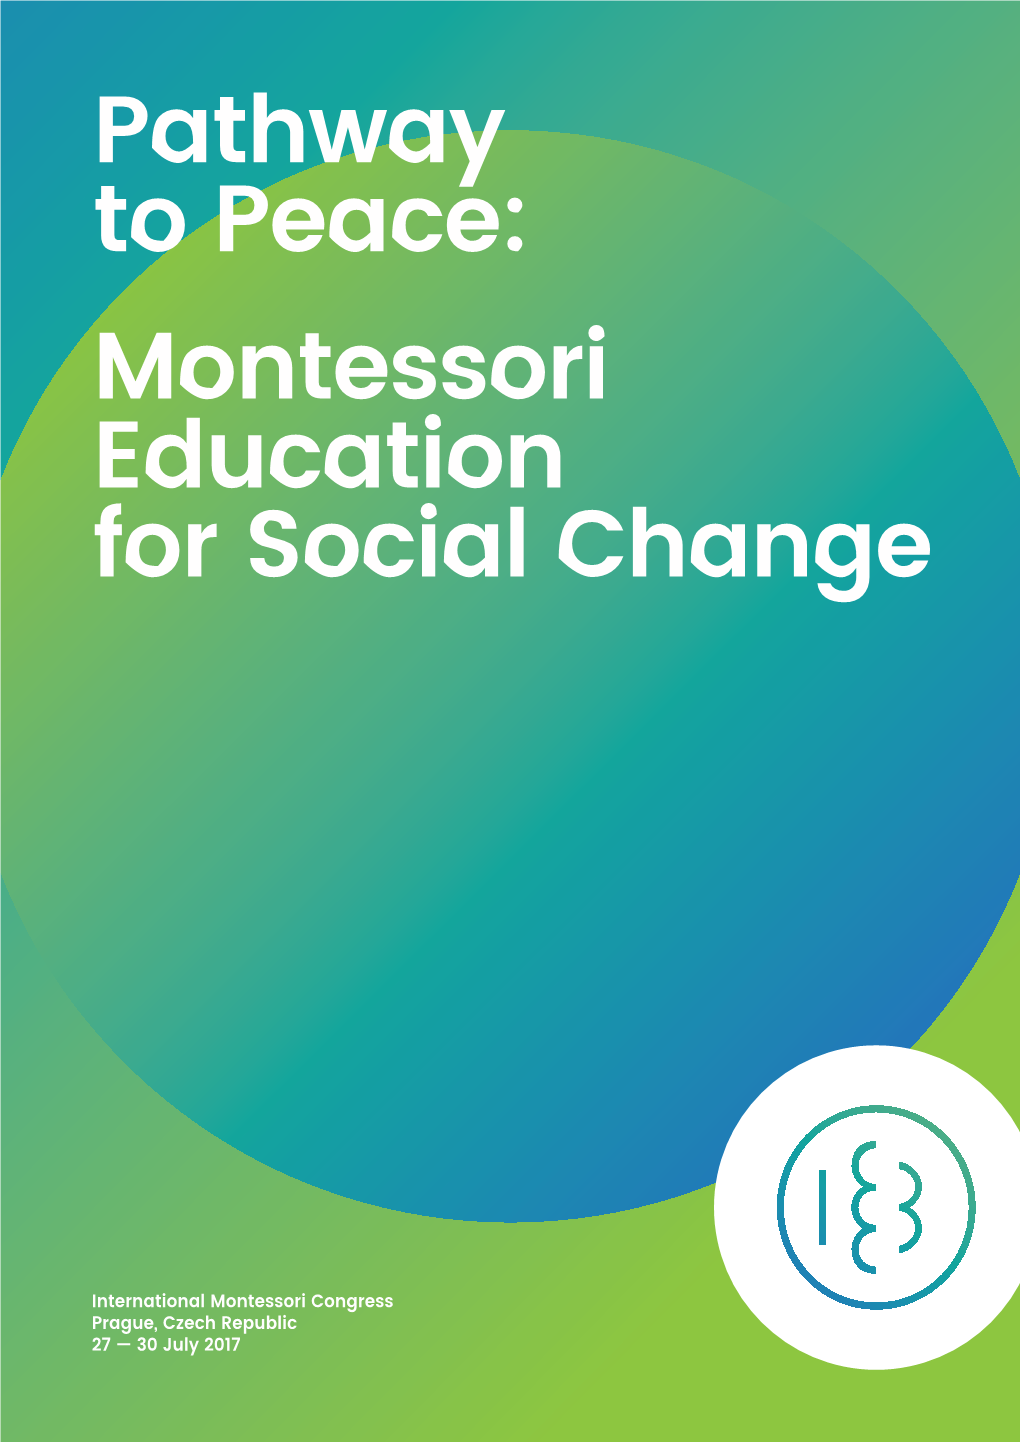 Pathway to Peace: Montessori Education for Social Change